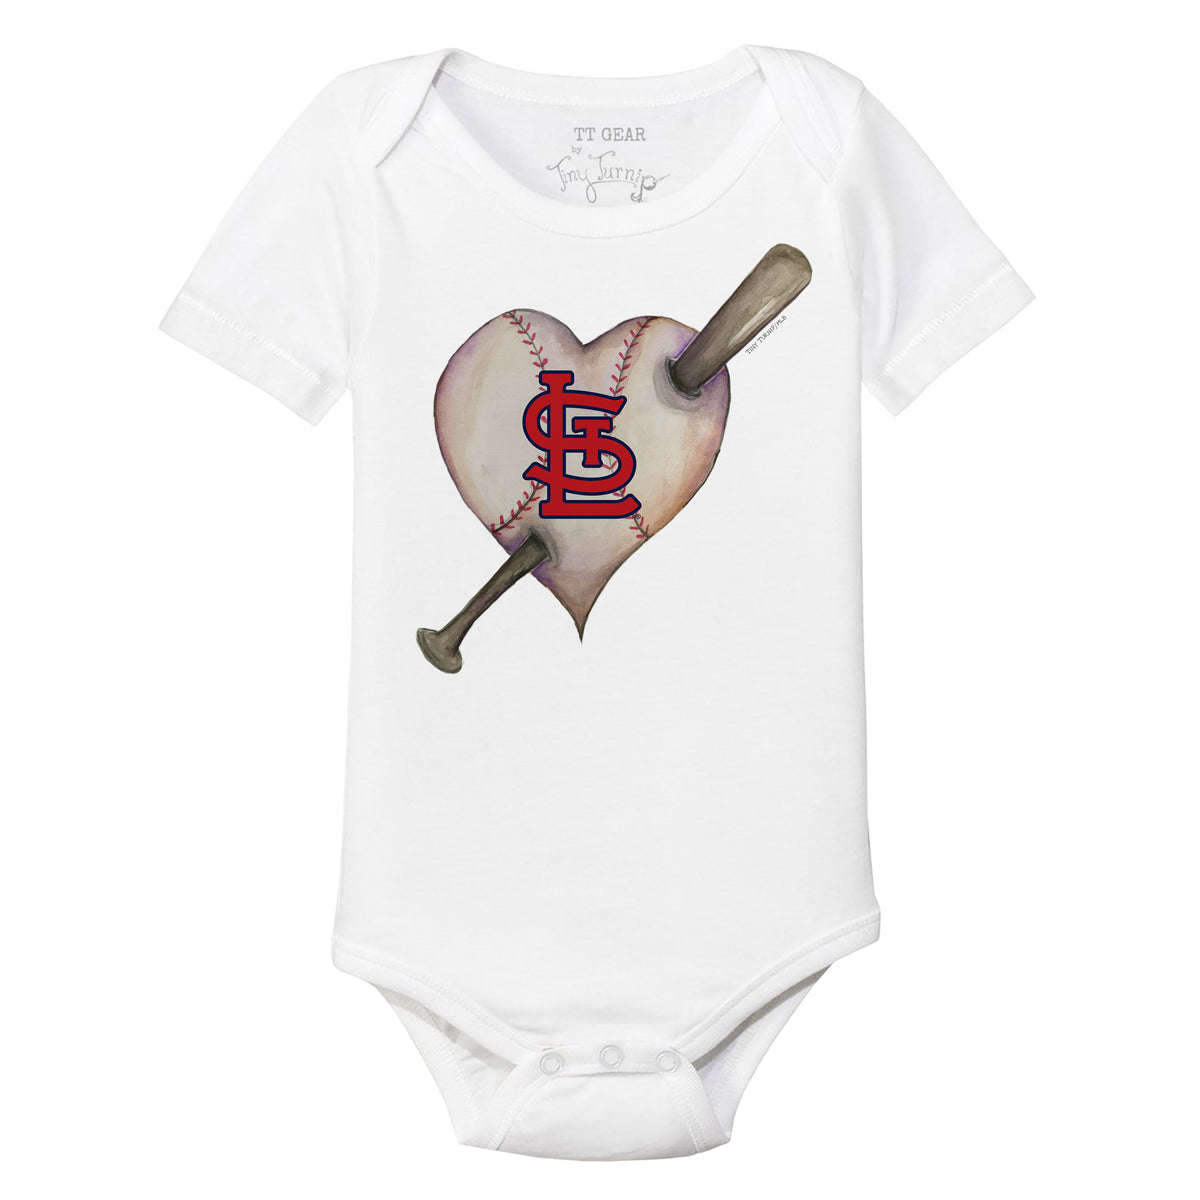 St. Louis Cardinals Tiny Turnip Unisex State Outline 3/4-Sleeve Raglan  T-Shirt - White/Red